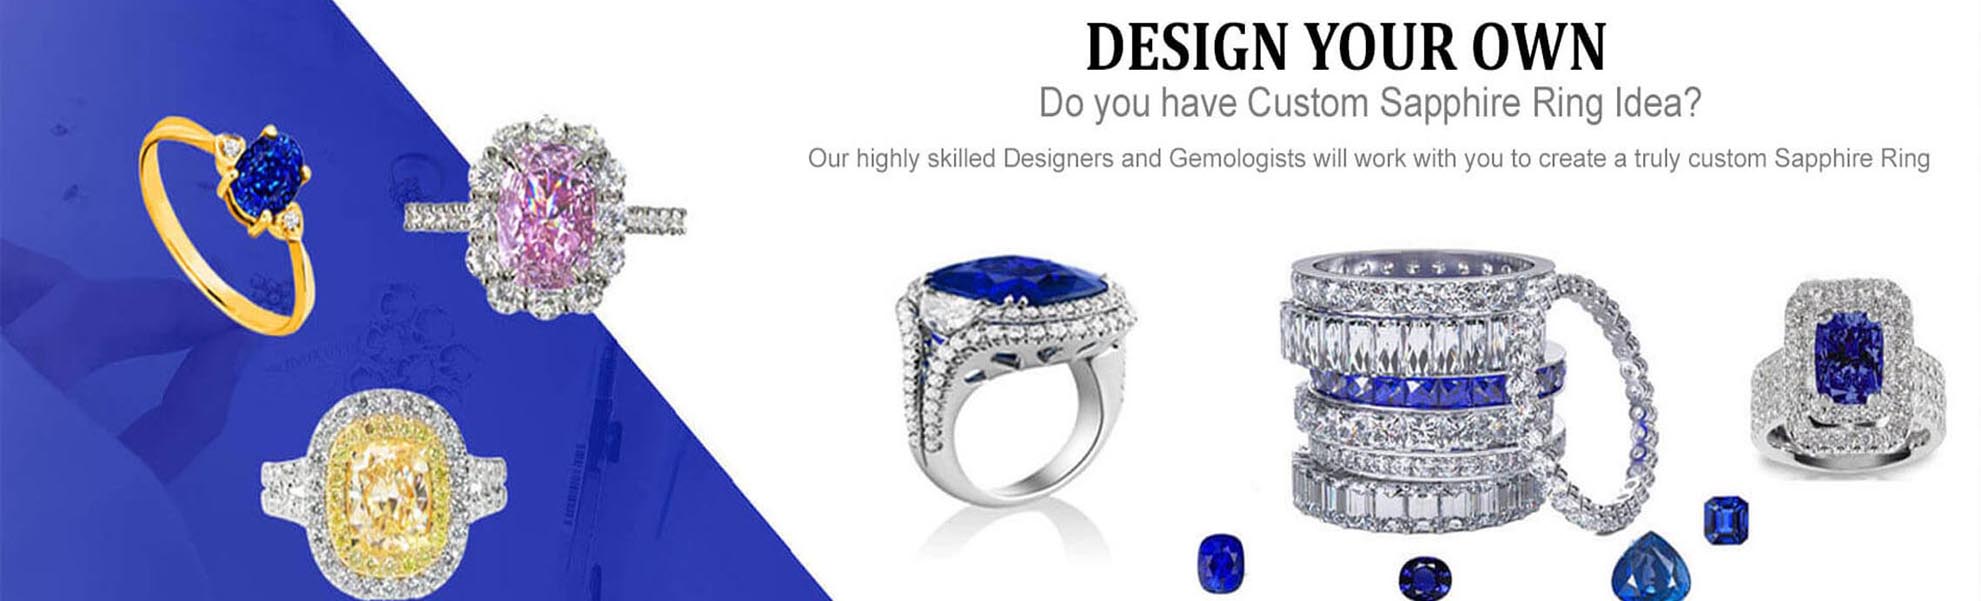 Design your Own Sapphire Rings Design